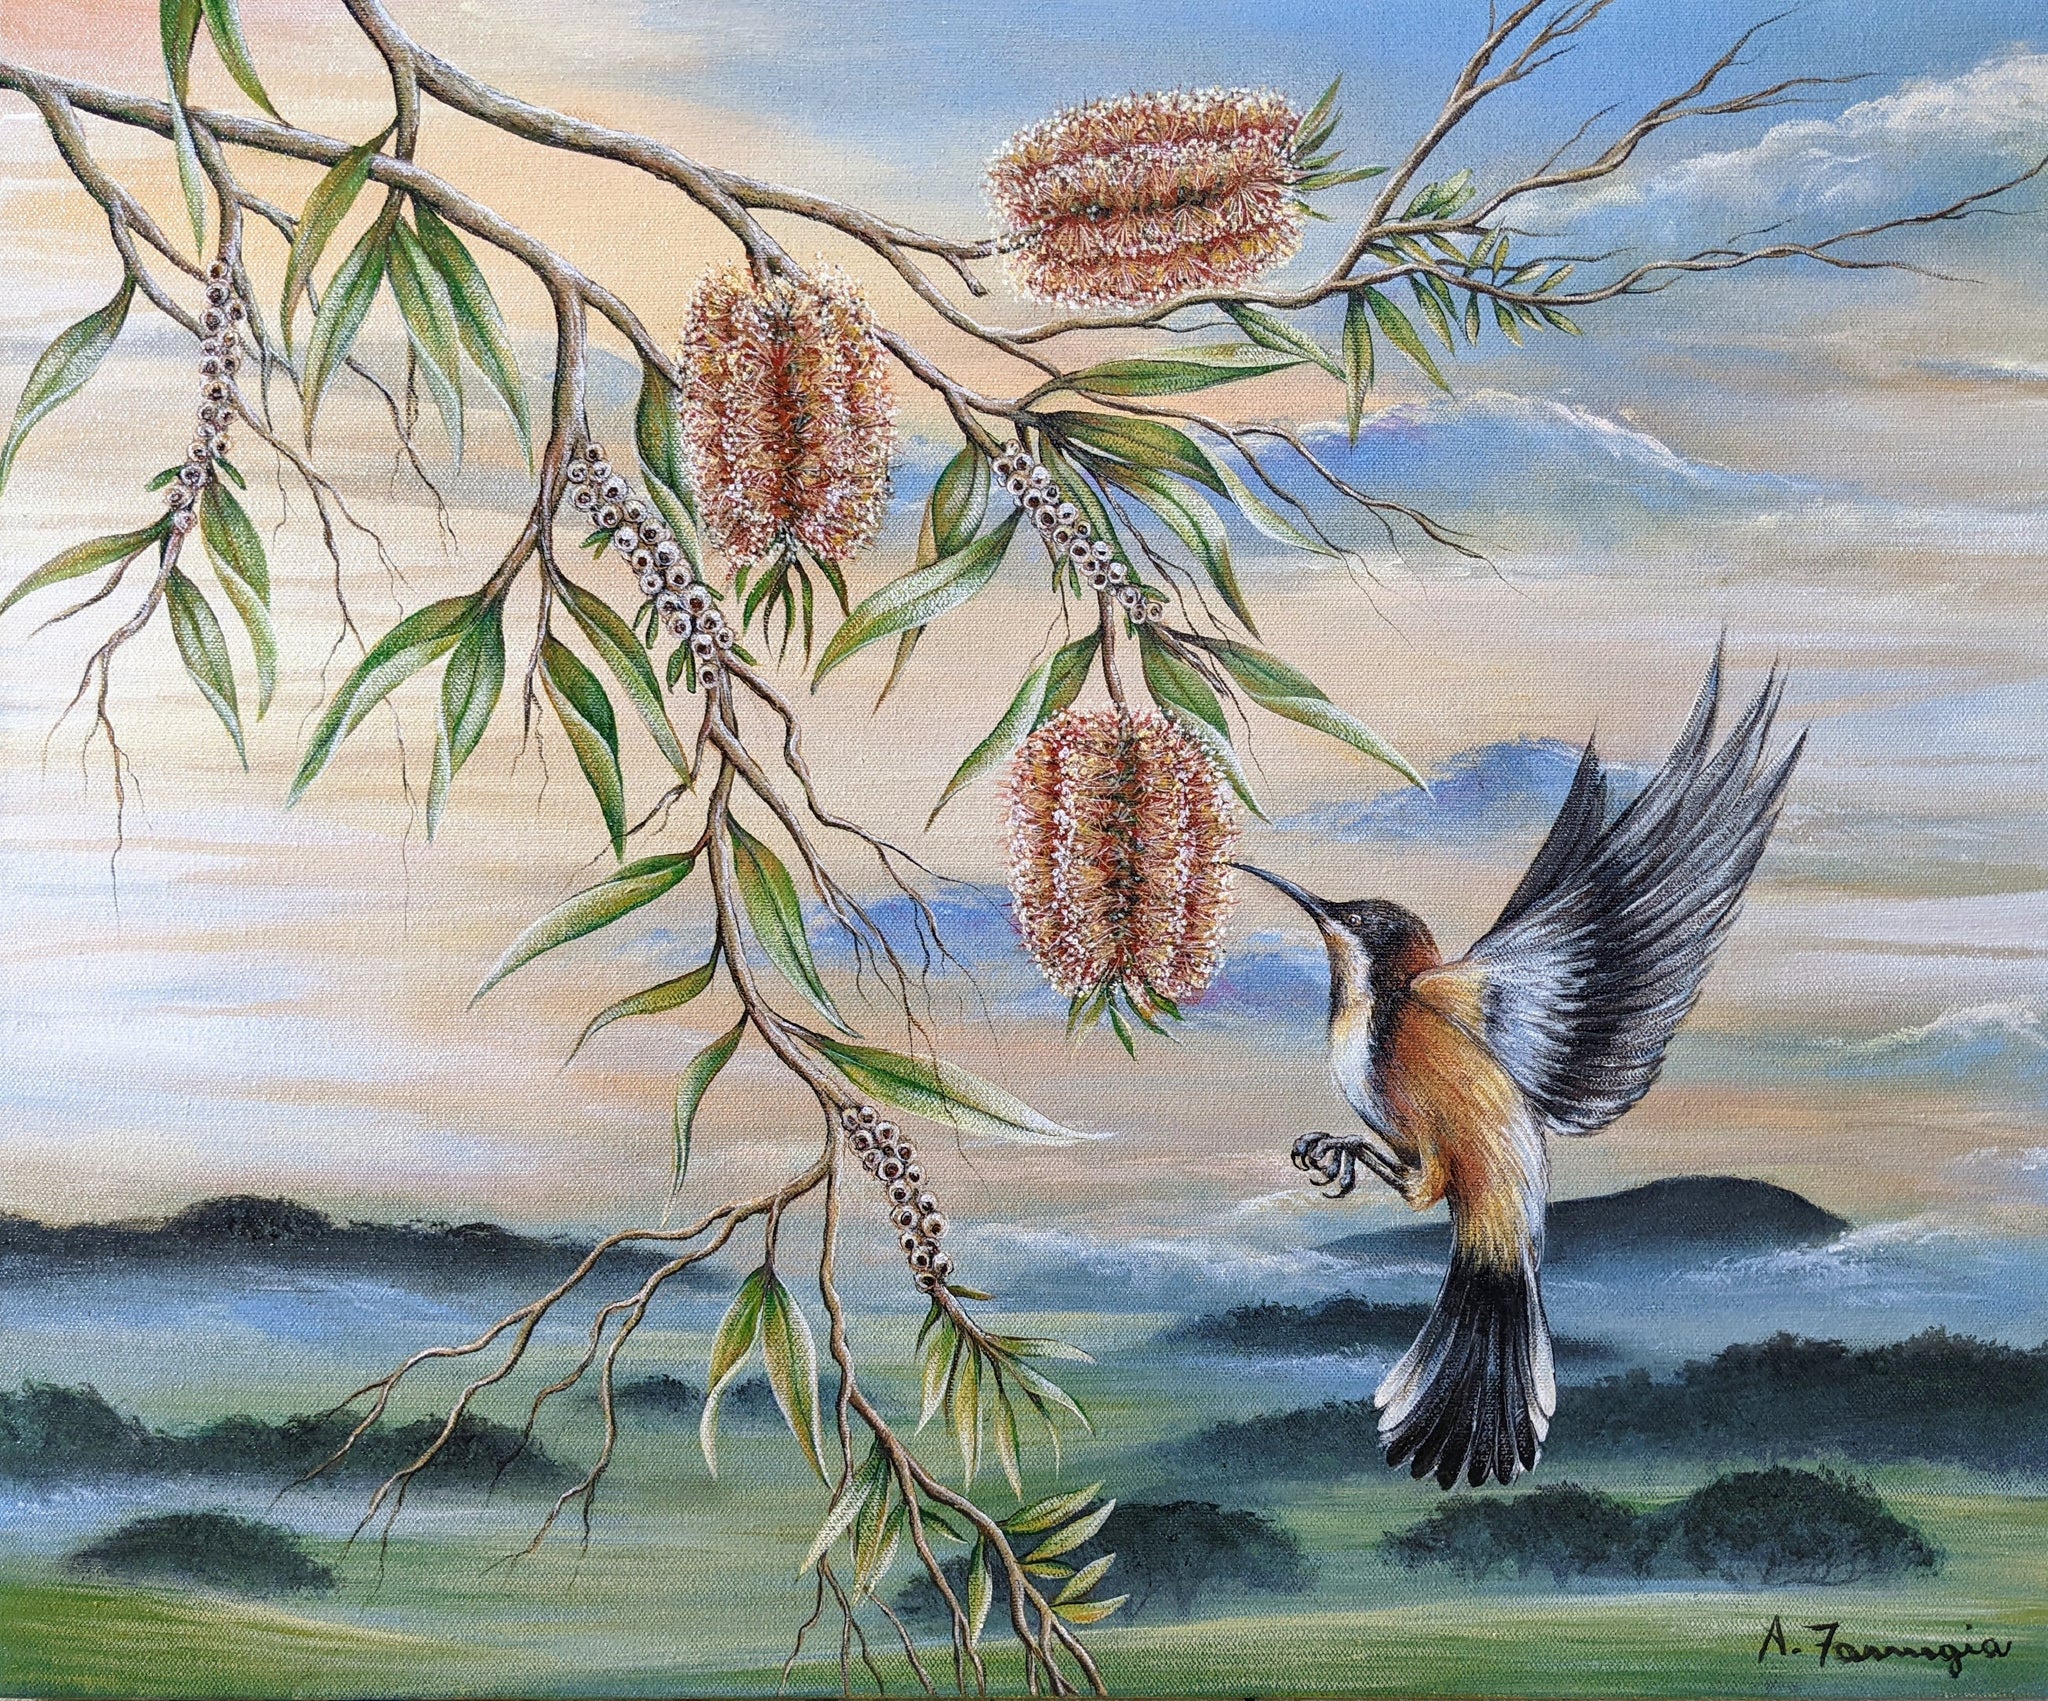 Nectar Of Life Is Nature 51 x 61 cm SOLD